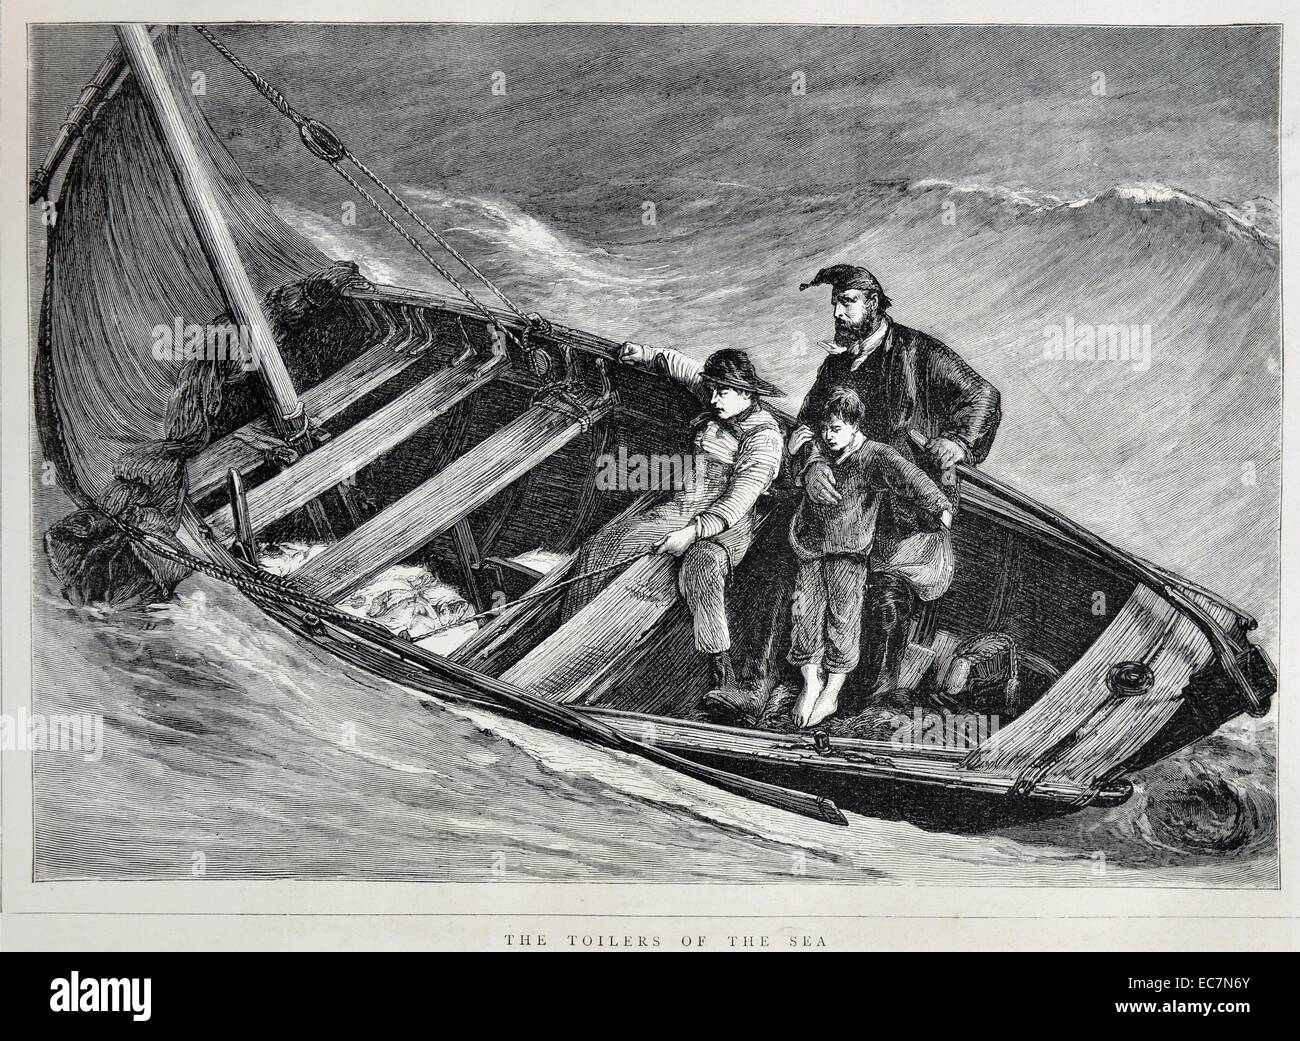 Engraving depicts Gilliatt from the novel 'Toilers of the Sea' battling against stormy conditions in search of Durande. Dated 1870 Stock Photo